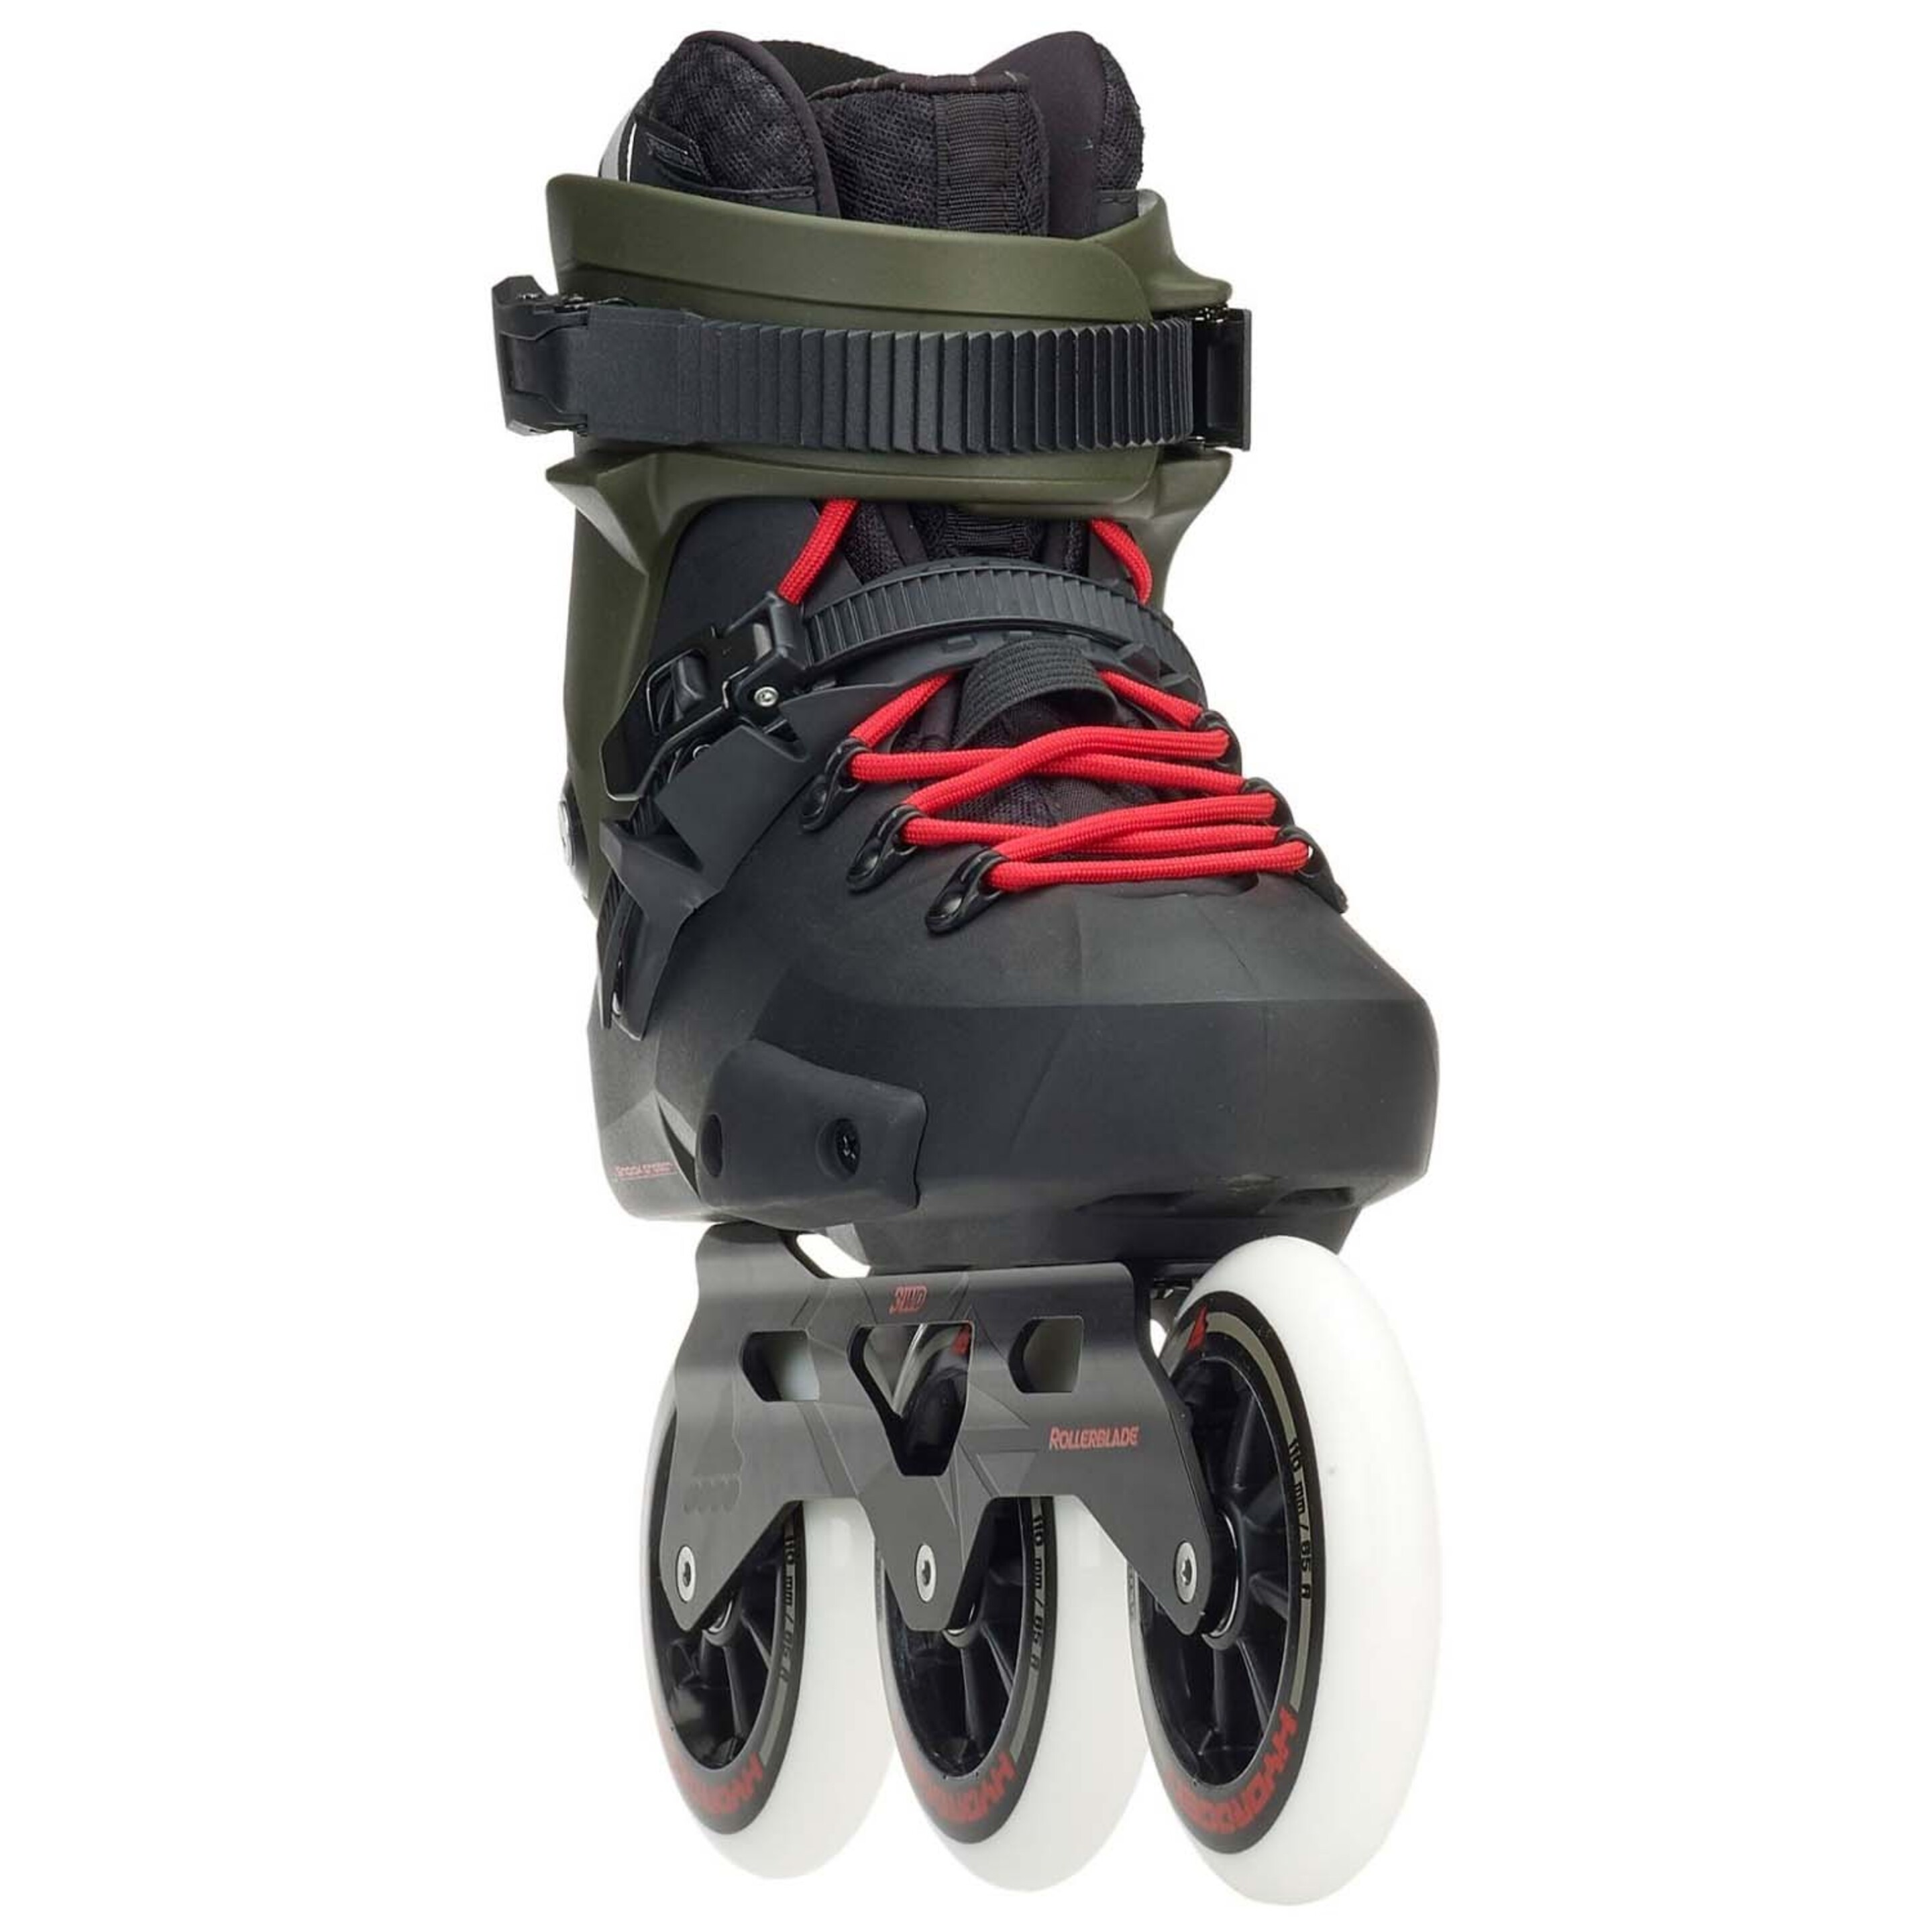 Patines Twister Edge 3wd Rollerblade